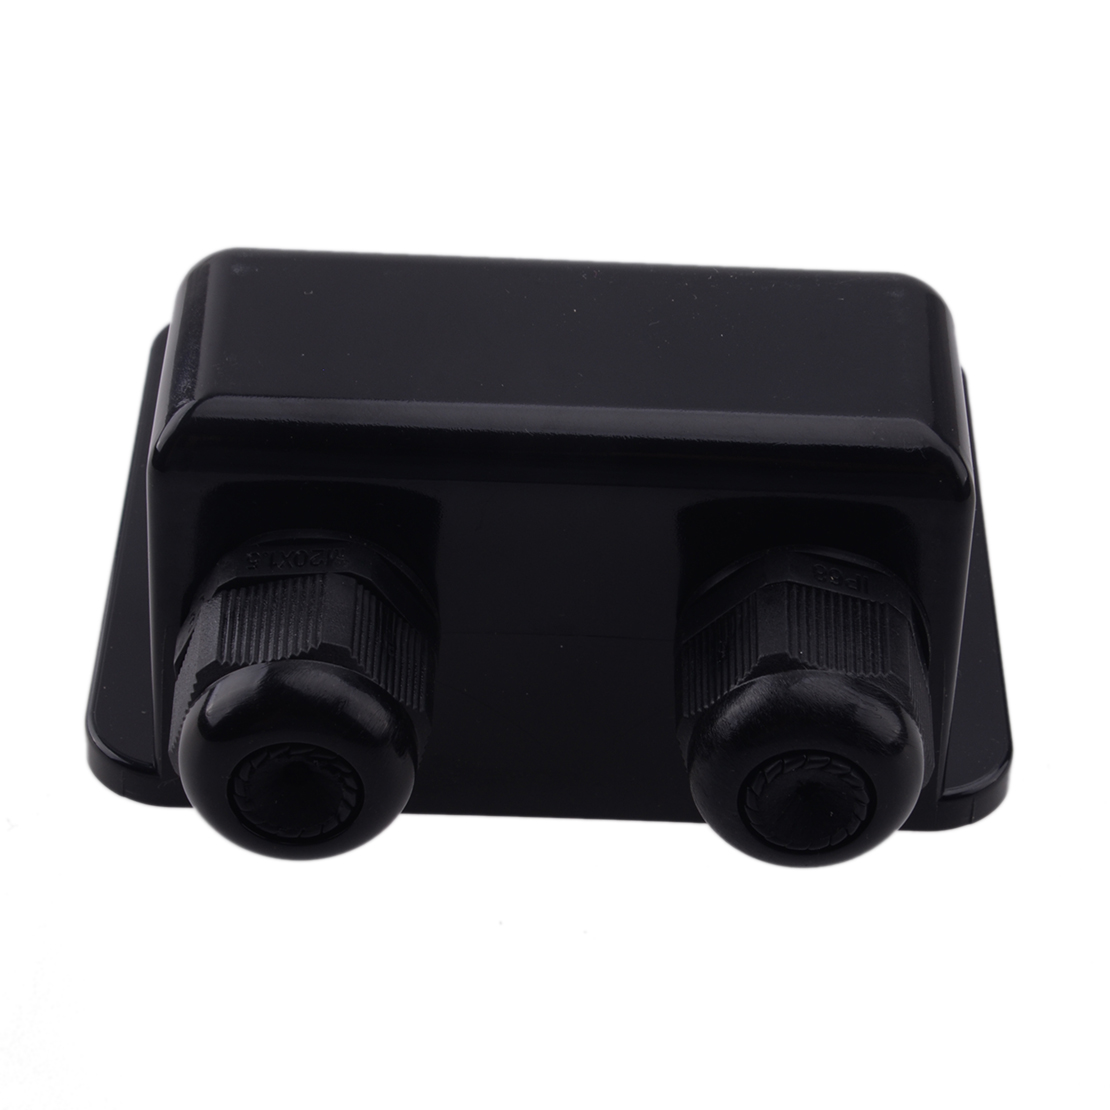 Roof Top Solar Panel Double Cable Entry Gland Box Case For Cable Types 6mm to 12mm RV Camper Van Travel Trailer Caravan Boat